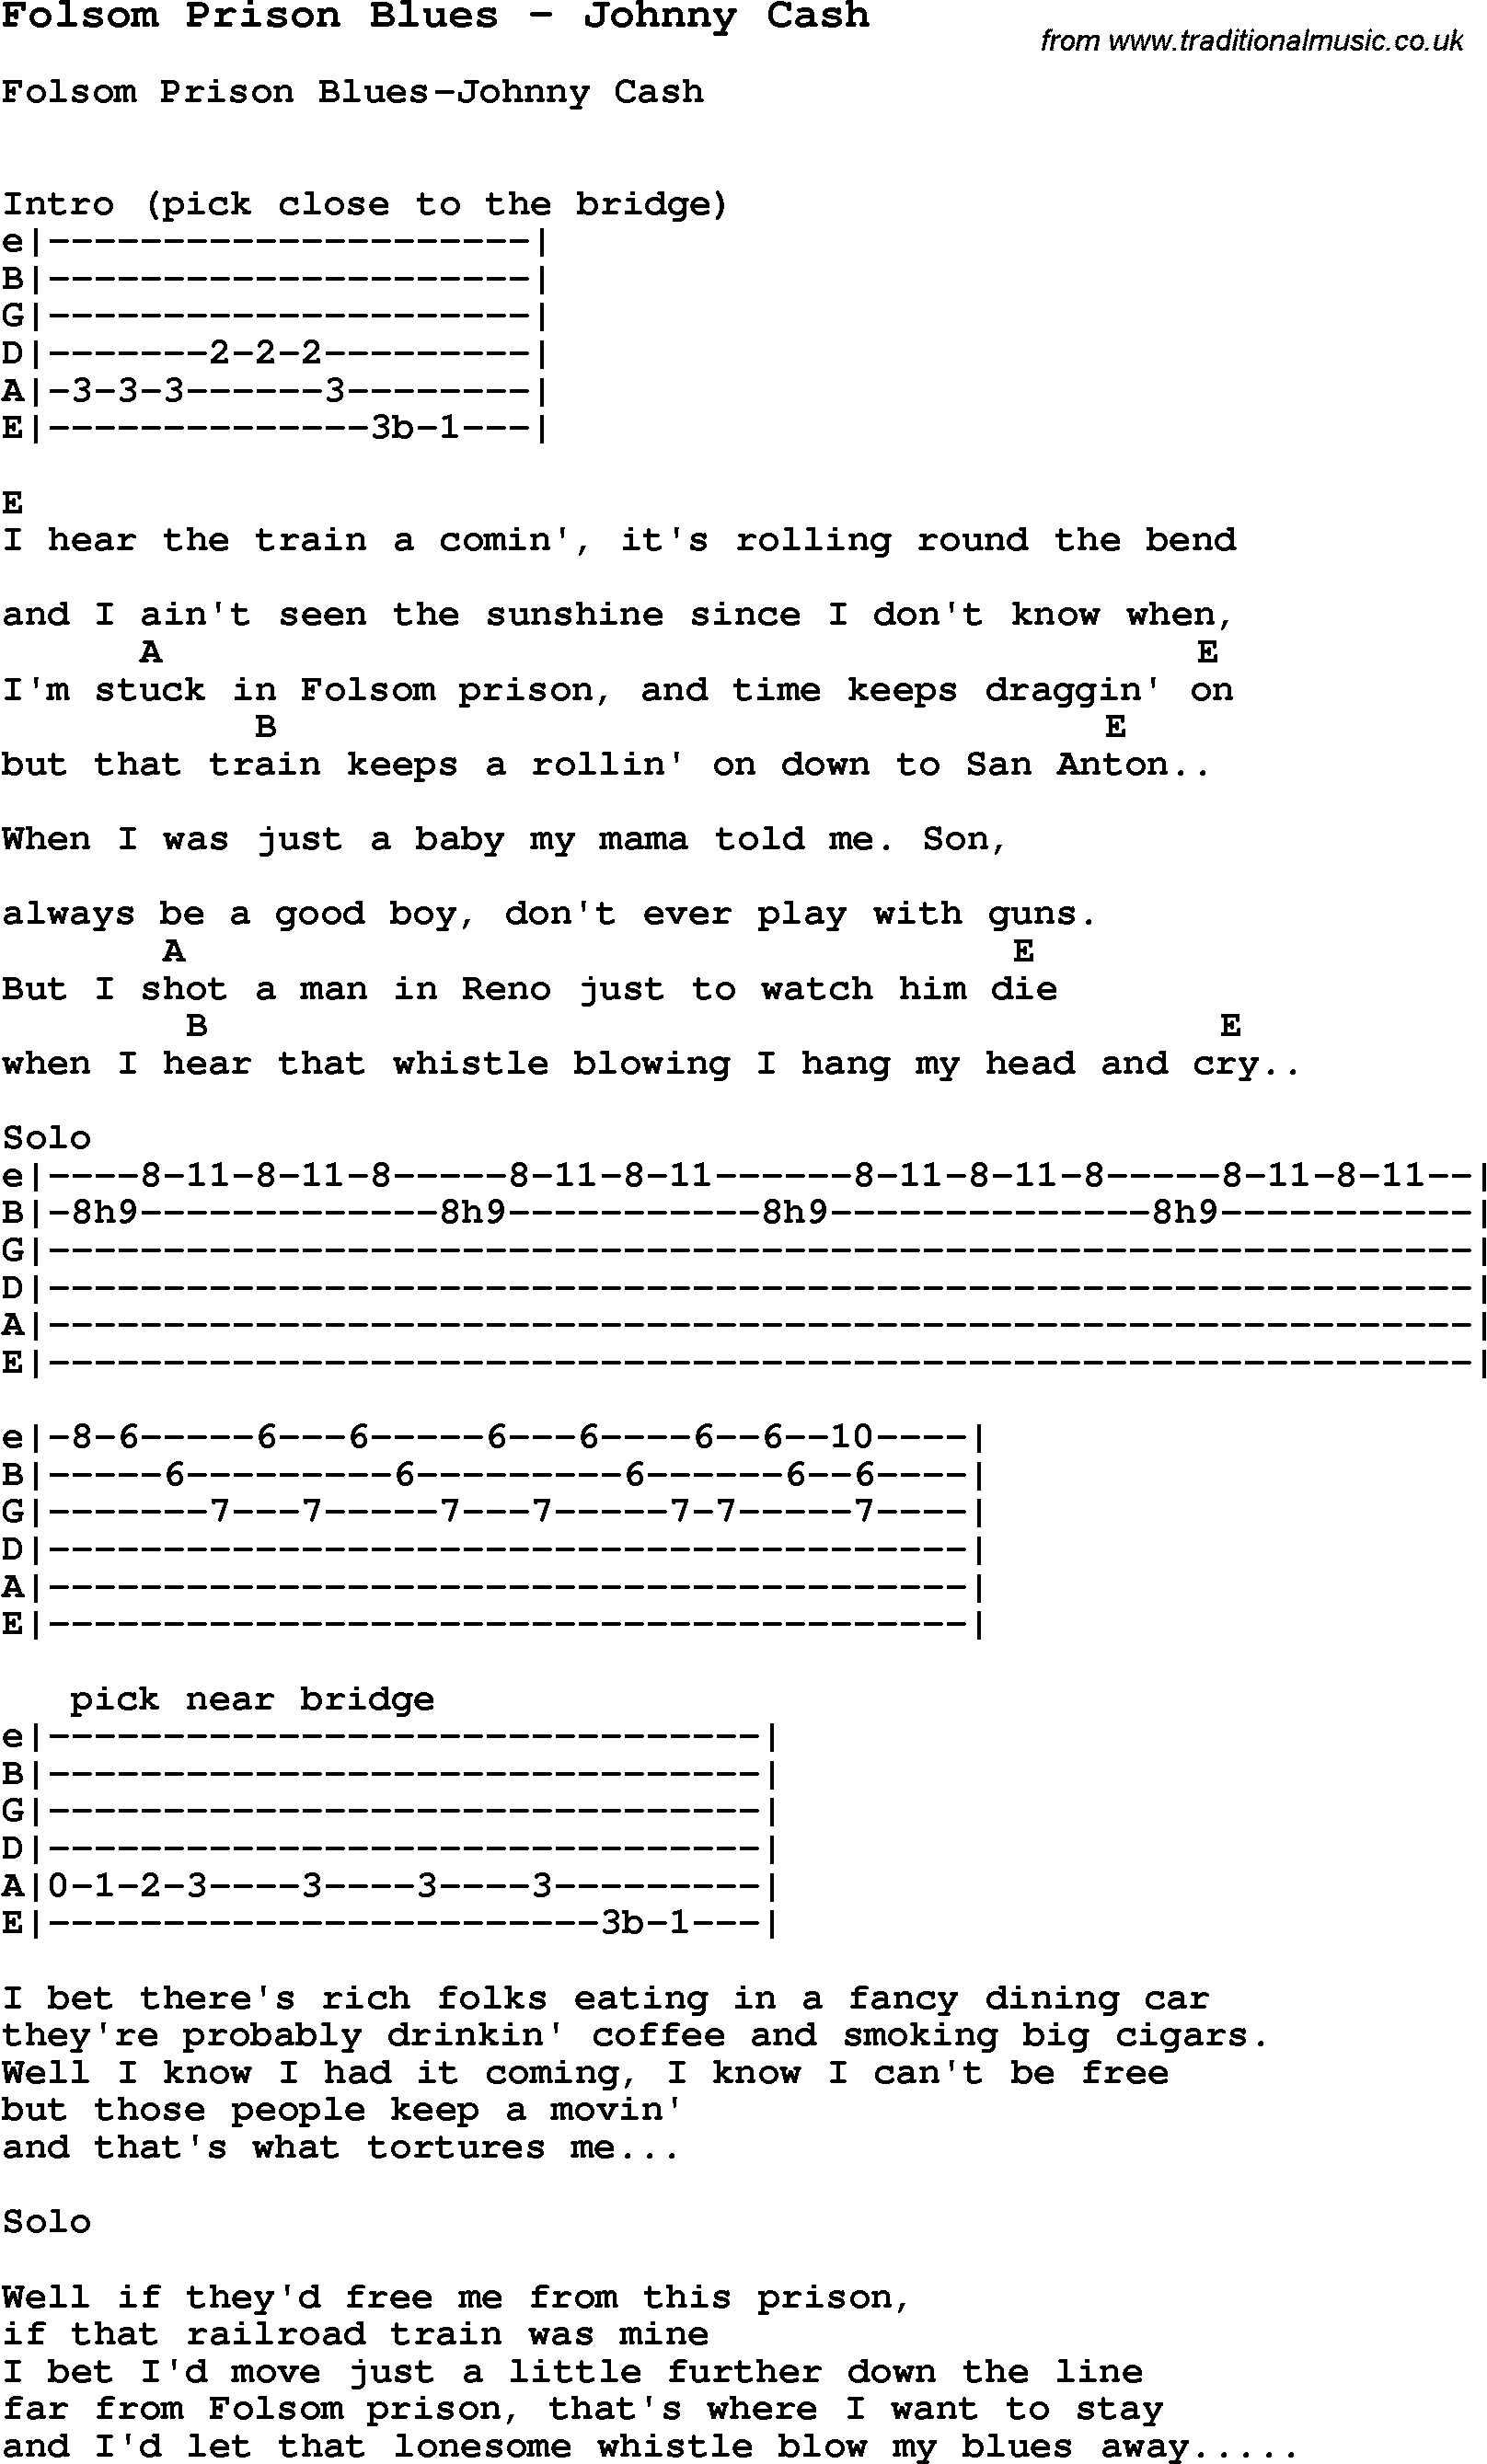 Song Folsom Prison Blues by Johnny Cash, with lyrics for vocal performance and accompaniment chords for Ukulele, Guitar Banjo etc.